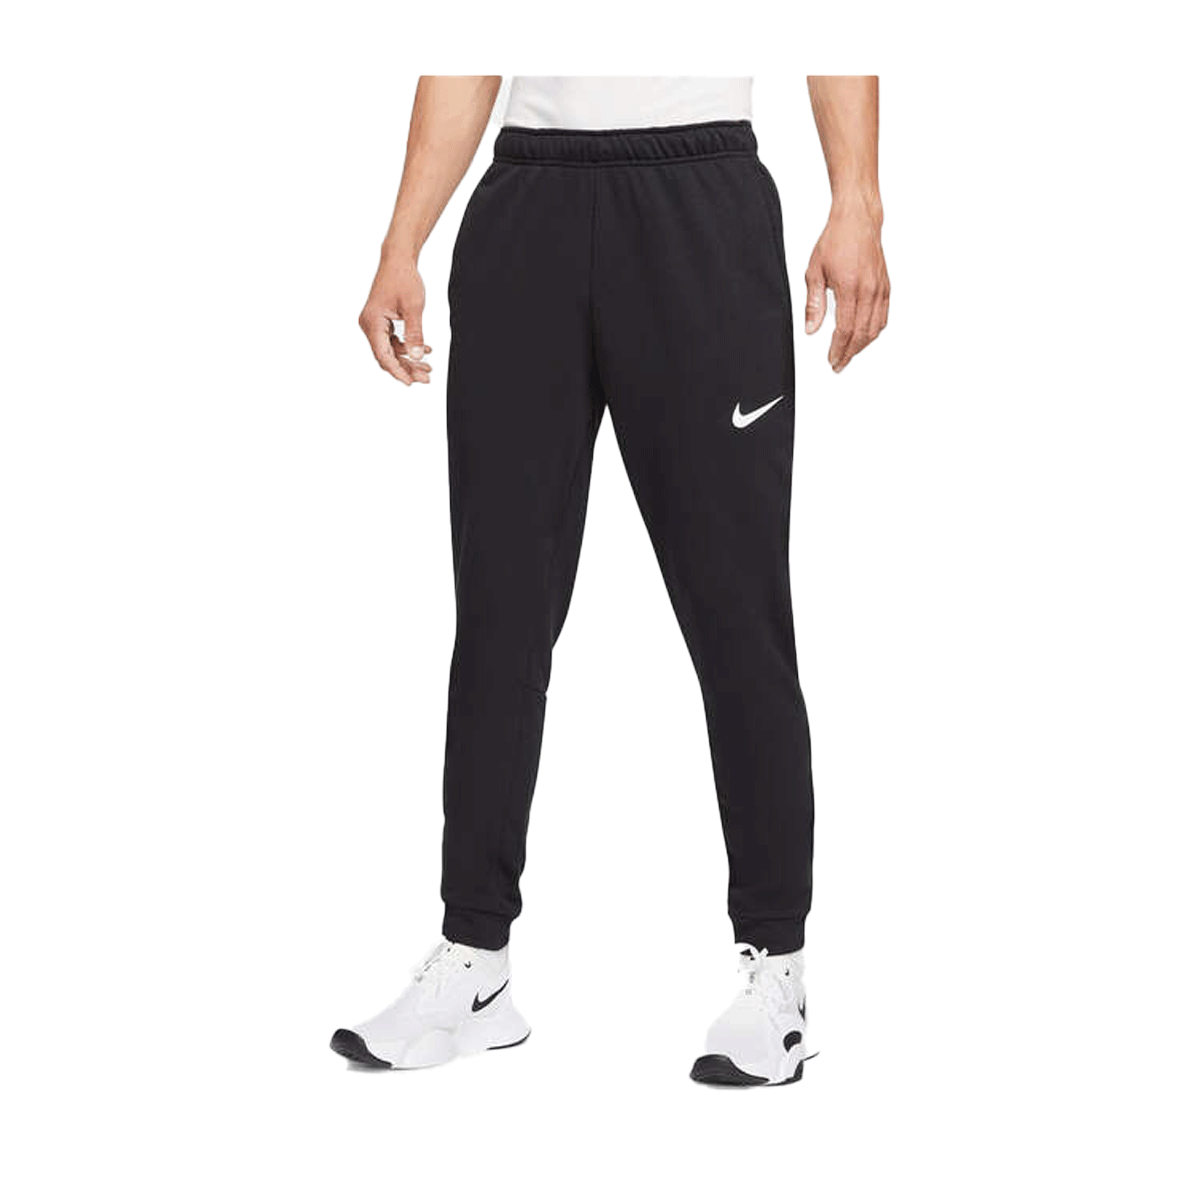 Tapered Fit Black Pants